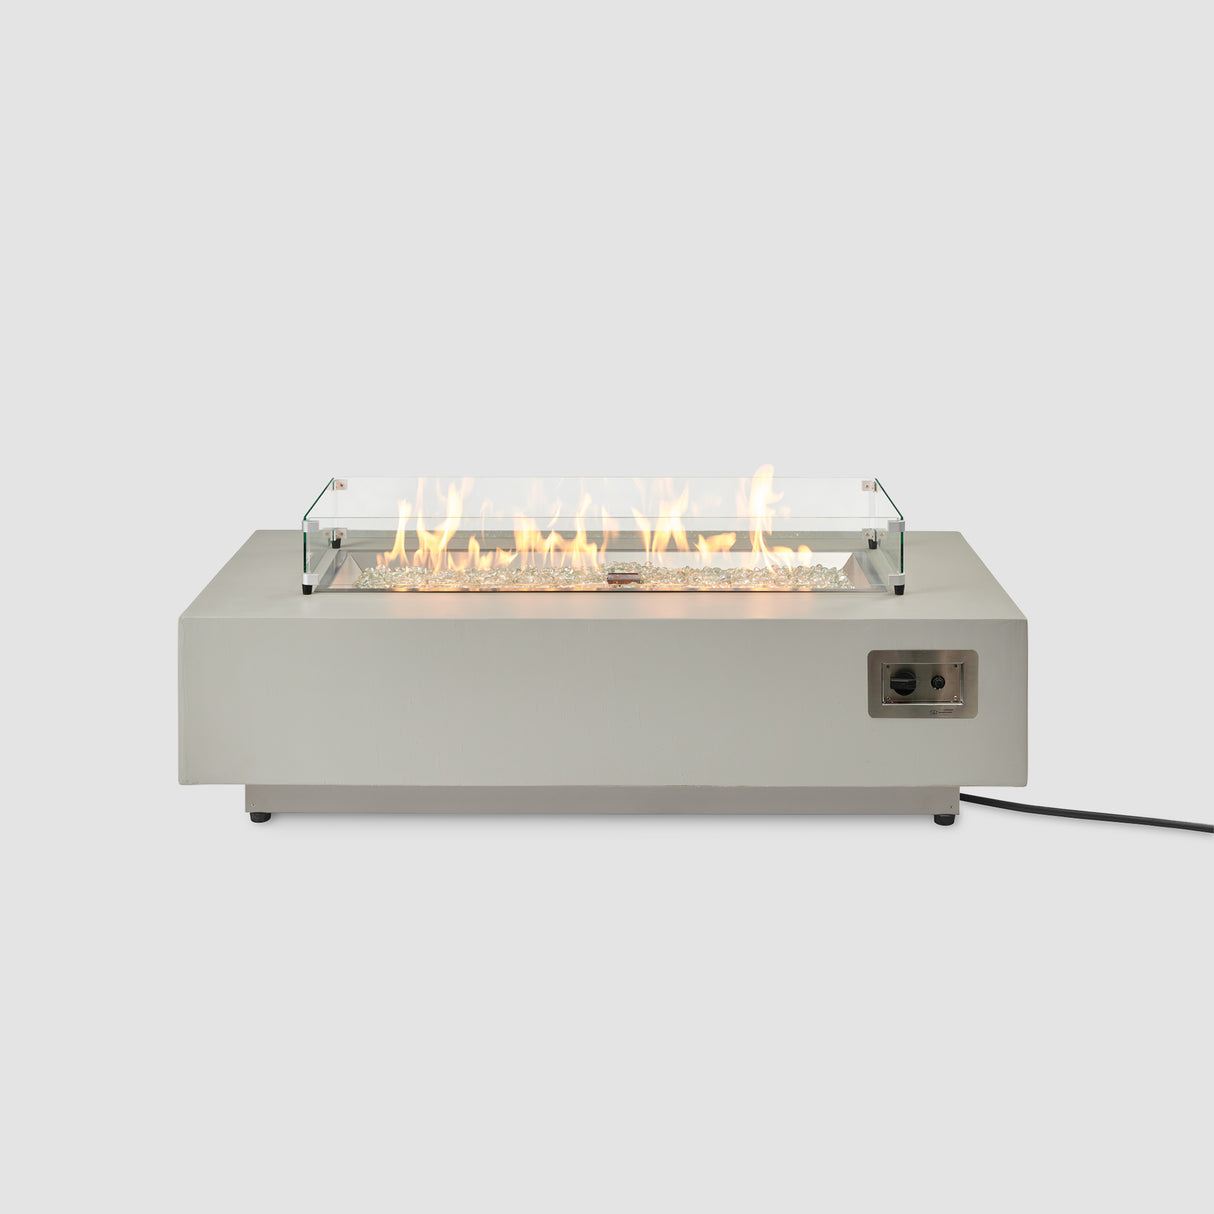 A front view of the Harbor View Rectangular Gas Fire Pit Table with a glass wind guard on the burner